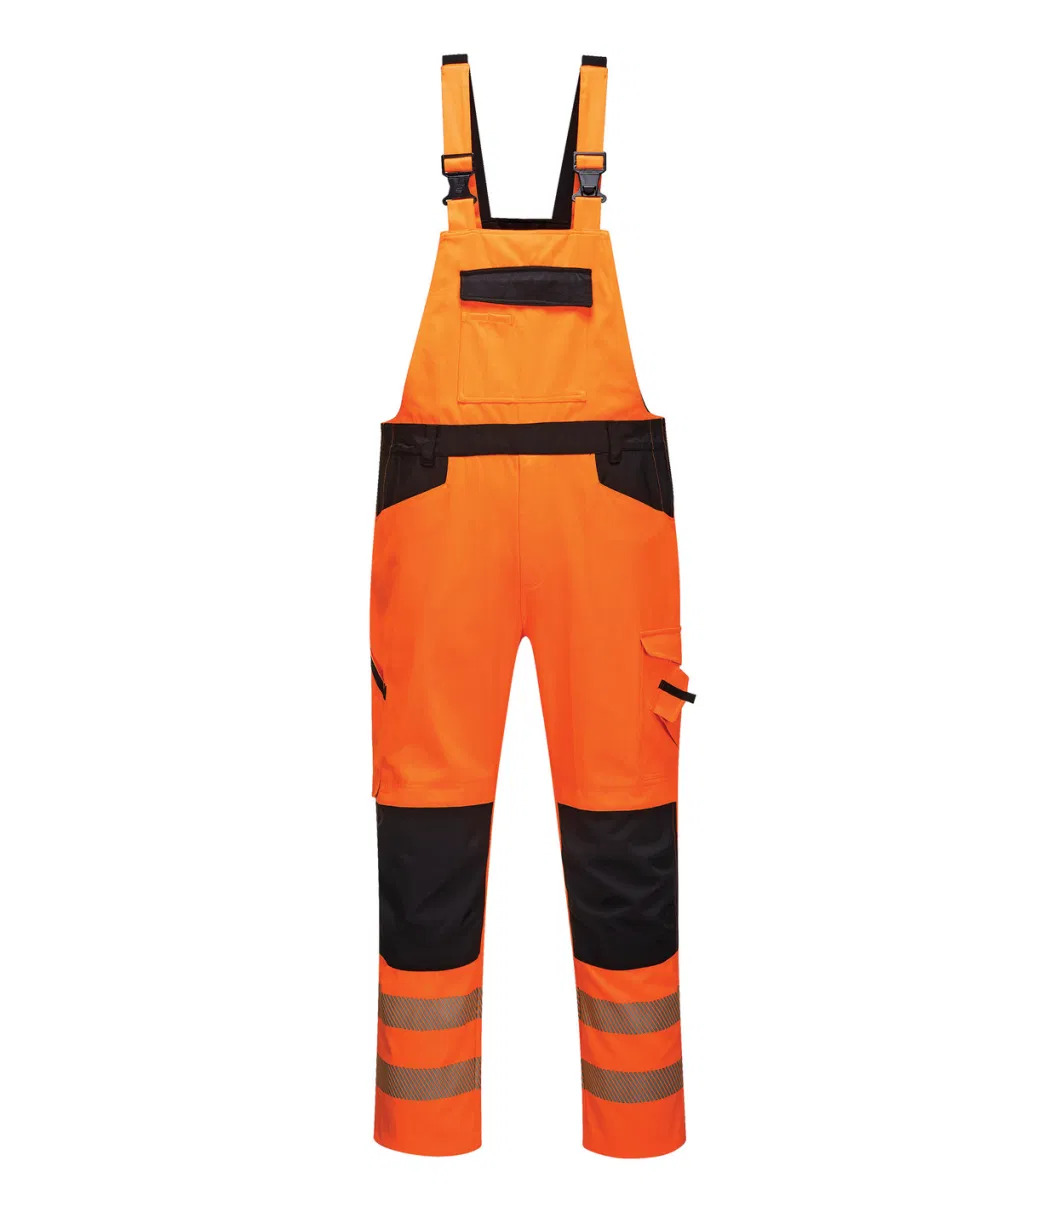 Mens Hi Vis Safety Pants Working Trousers with Reflective Tapes